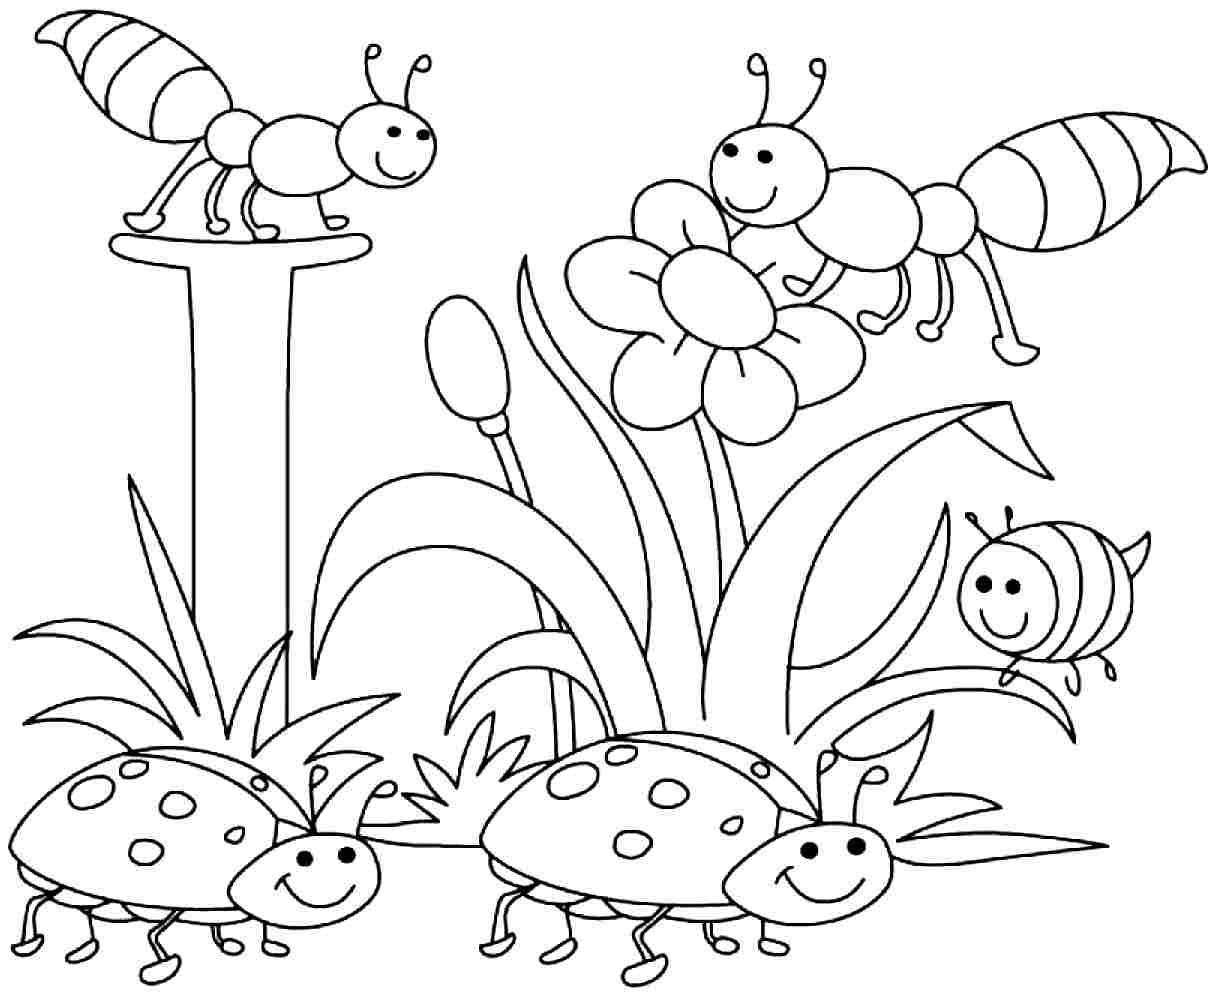 Free Spring Coloring Pages For Kids
 5 Best of Spring Season Coloring Pages Printable